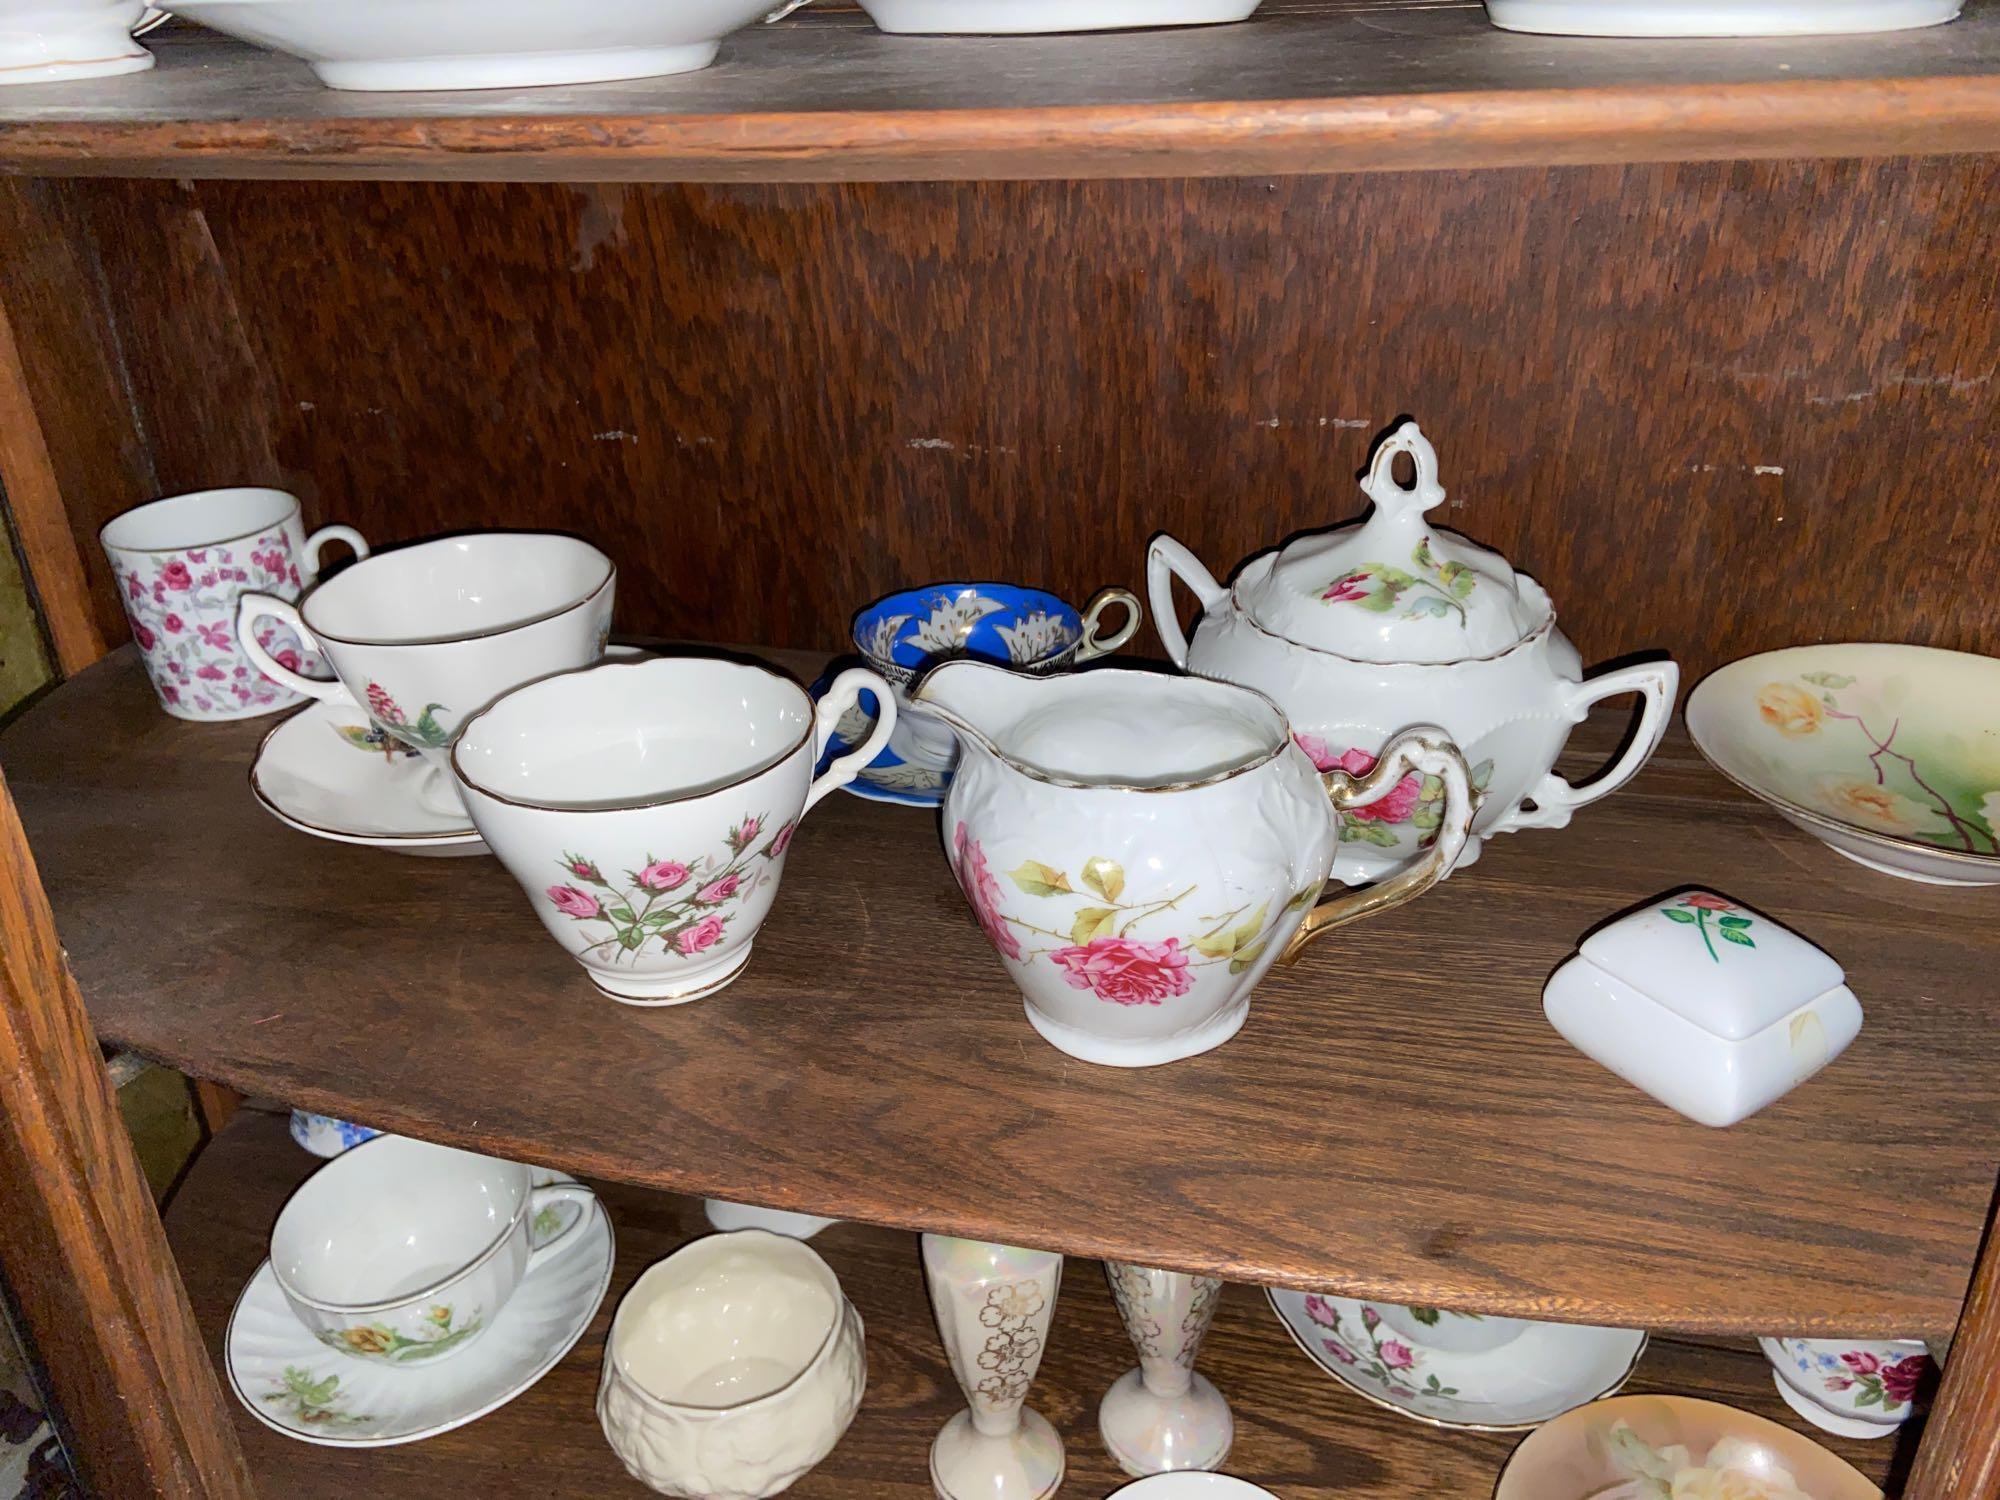 Contents of China Cabinet